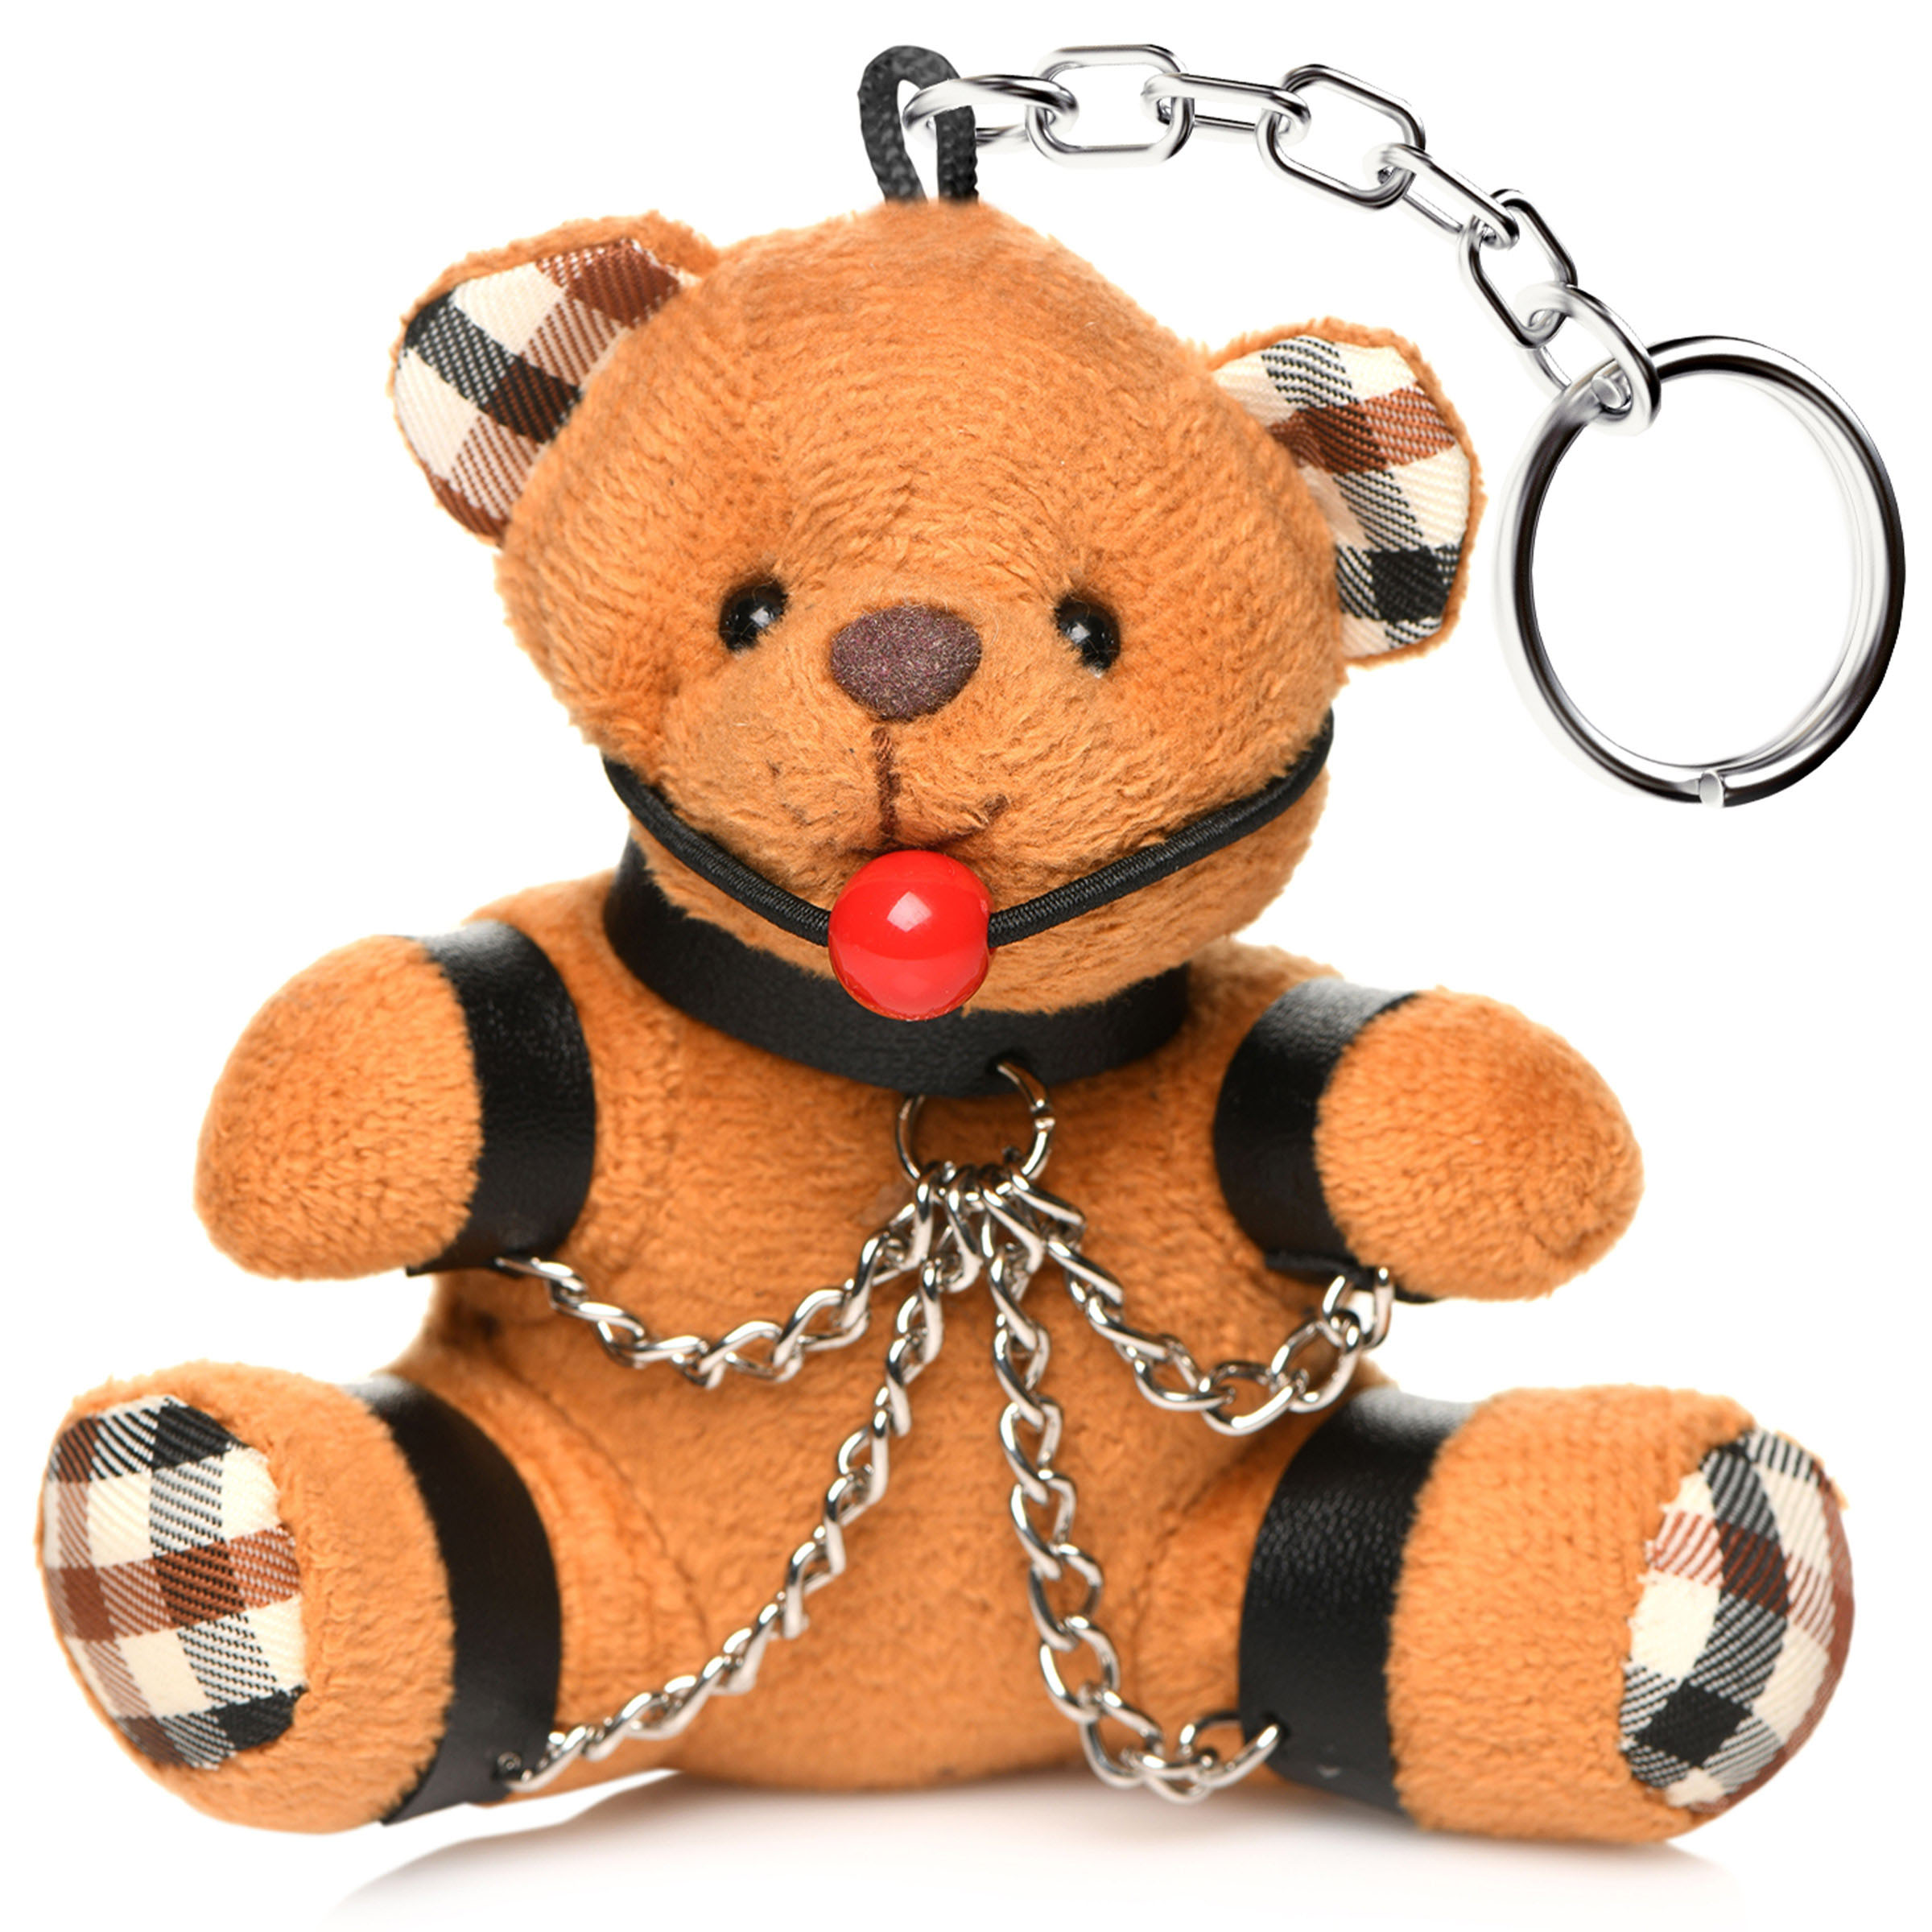 Give this gagged bear as a gag gift or keep it for yourself! The little bondage bear fits in the palm of your hand and will attach to a keychain or bag as a fun way to flag that you're kinky! With a collar